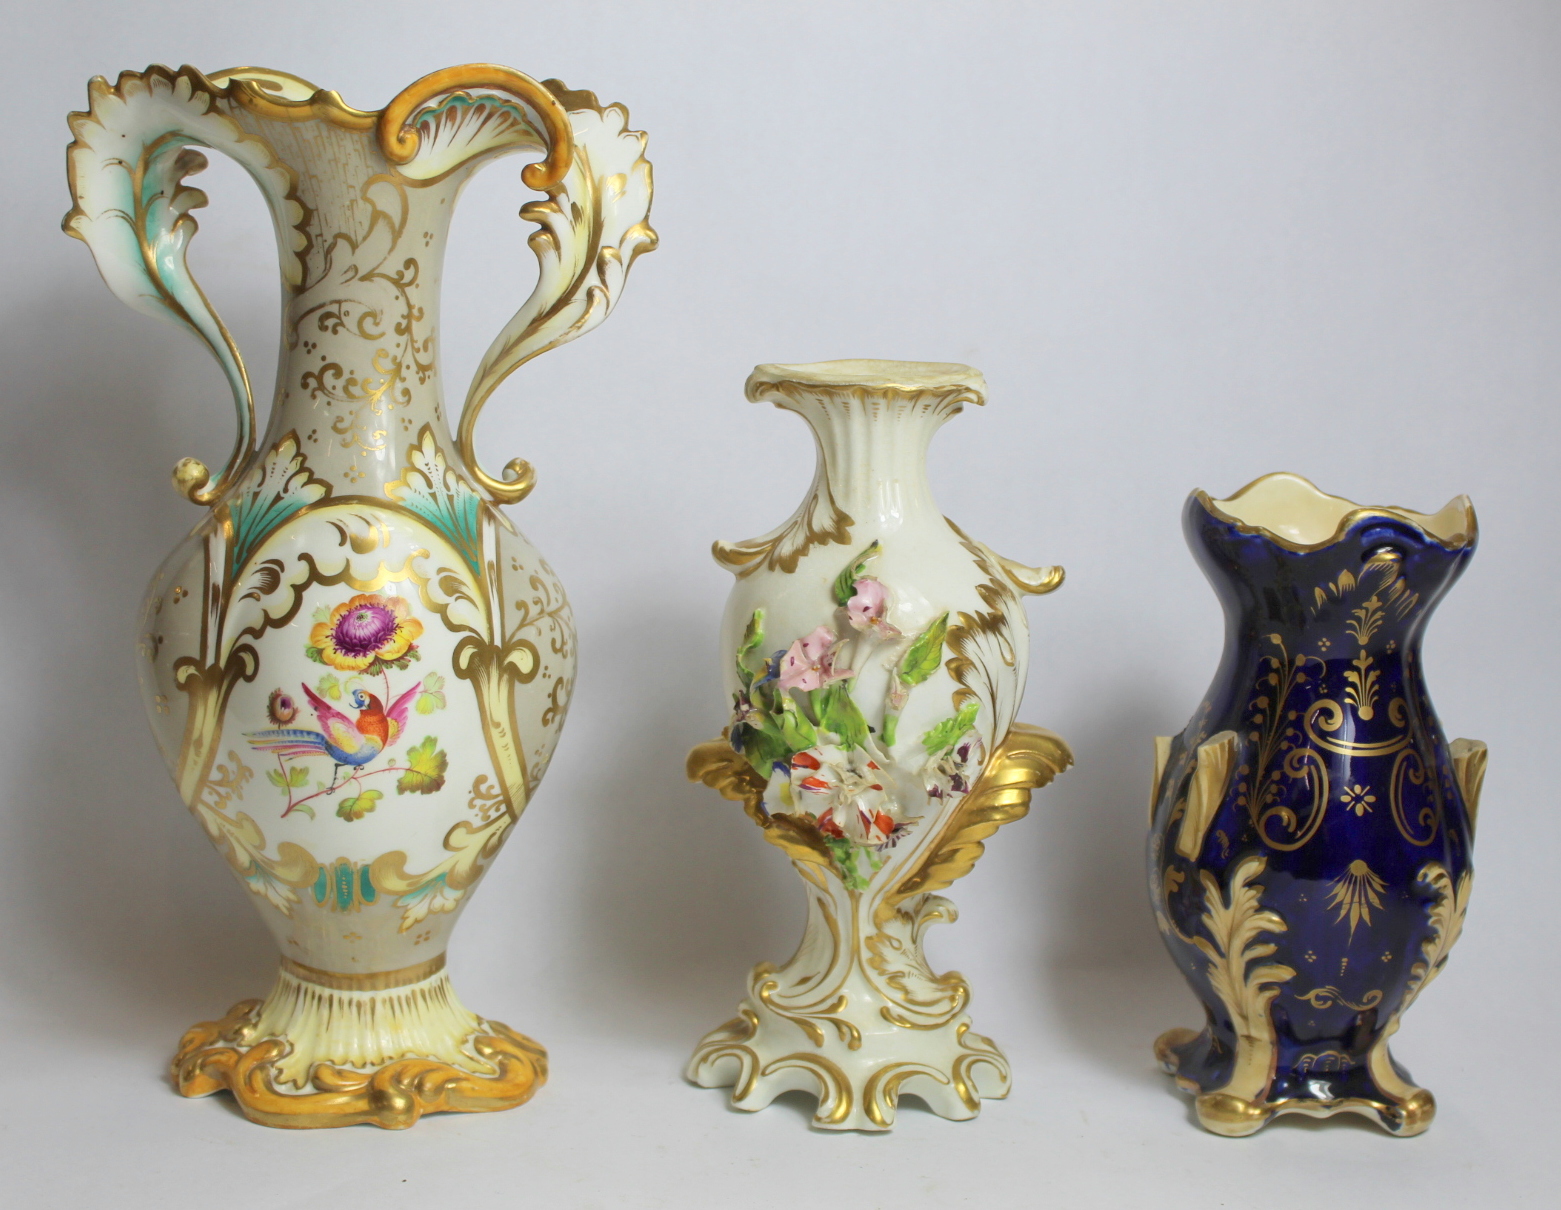 Early 19th century Derby porcelain vase with floral encrustation and moulded gilt foliate scrolling, - Image 2 of 11